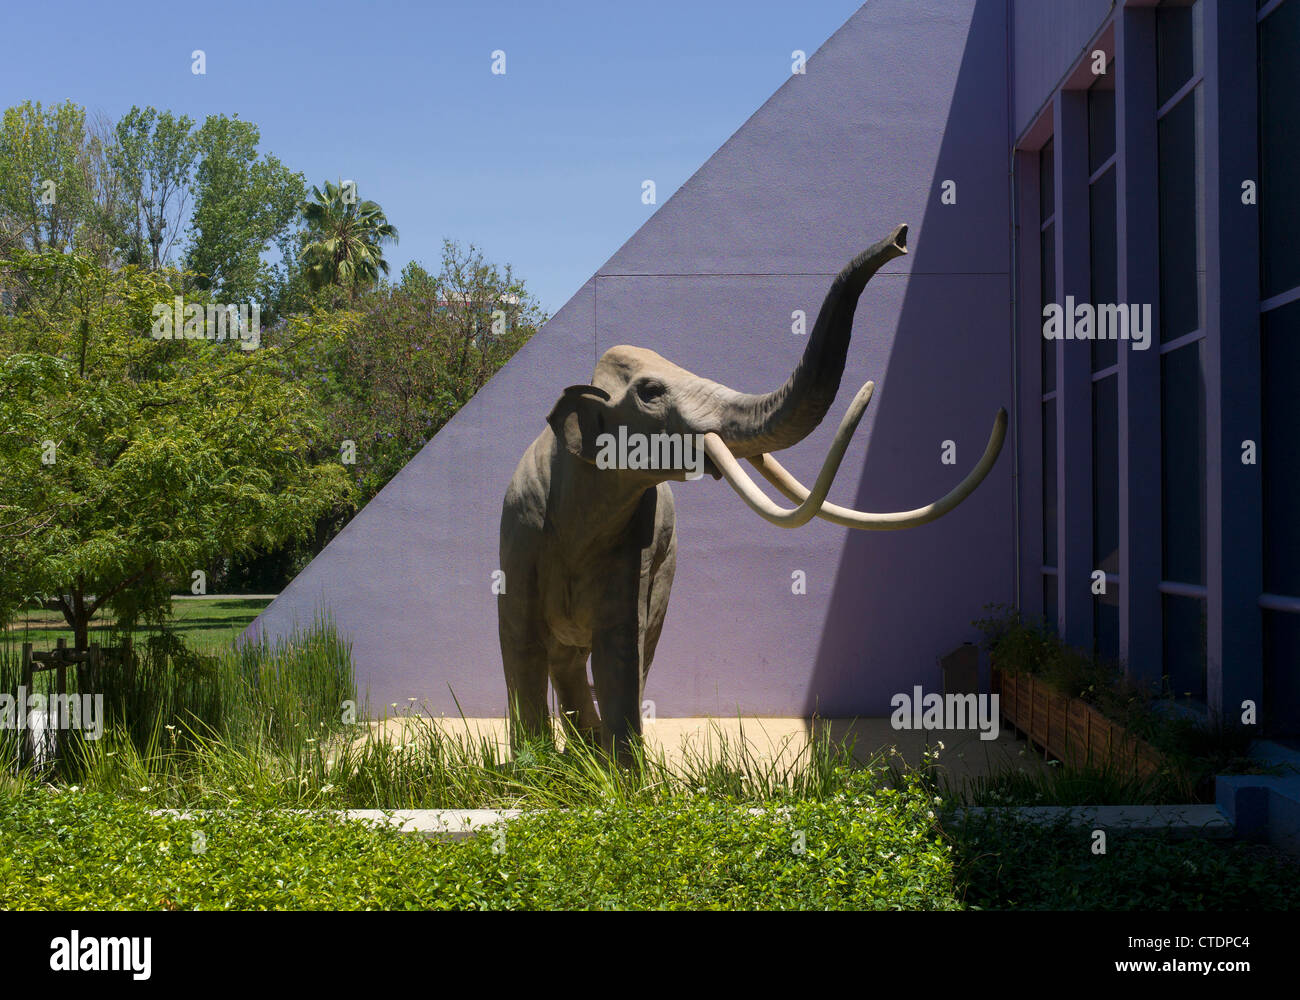 A mammoth model is seen at the Childrens Discovery museum in San Jose, California Stock Photo